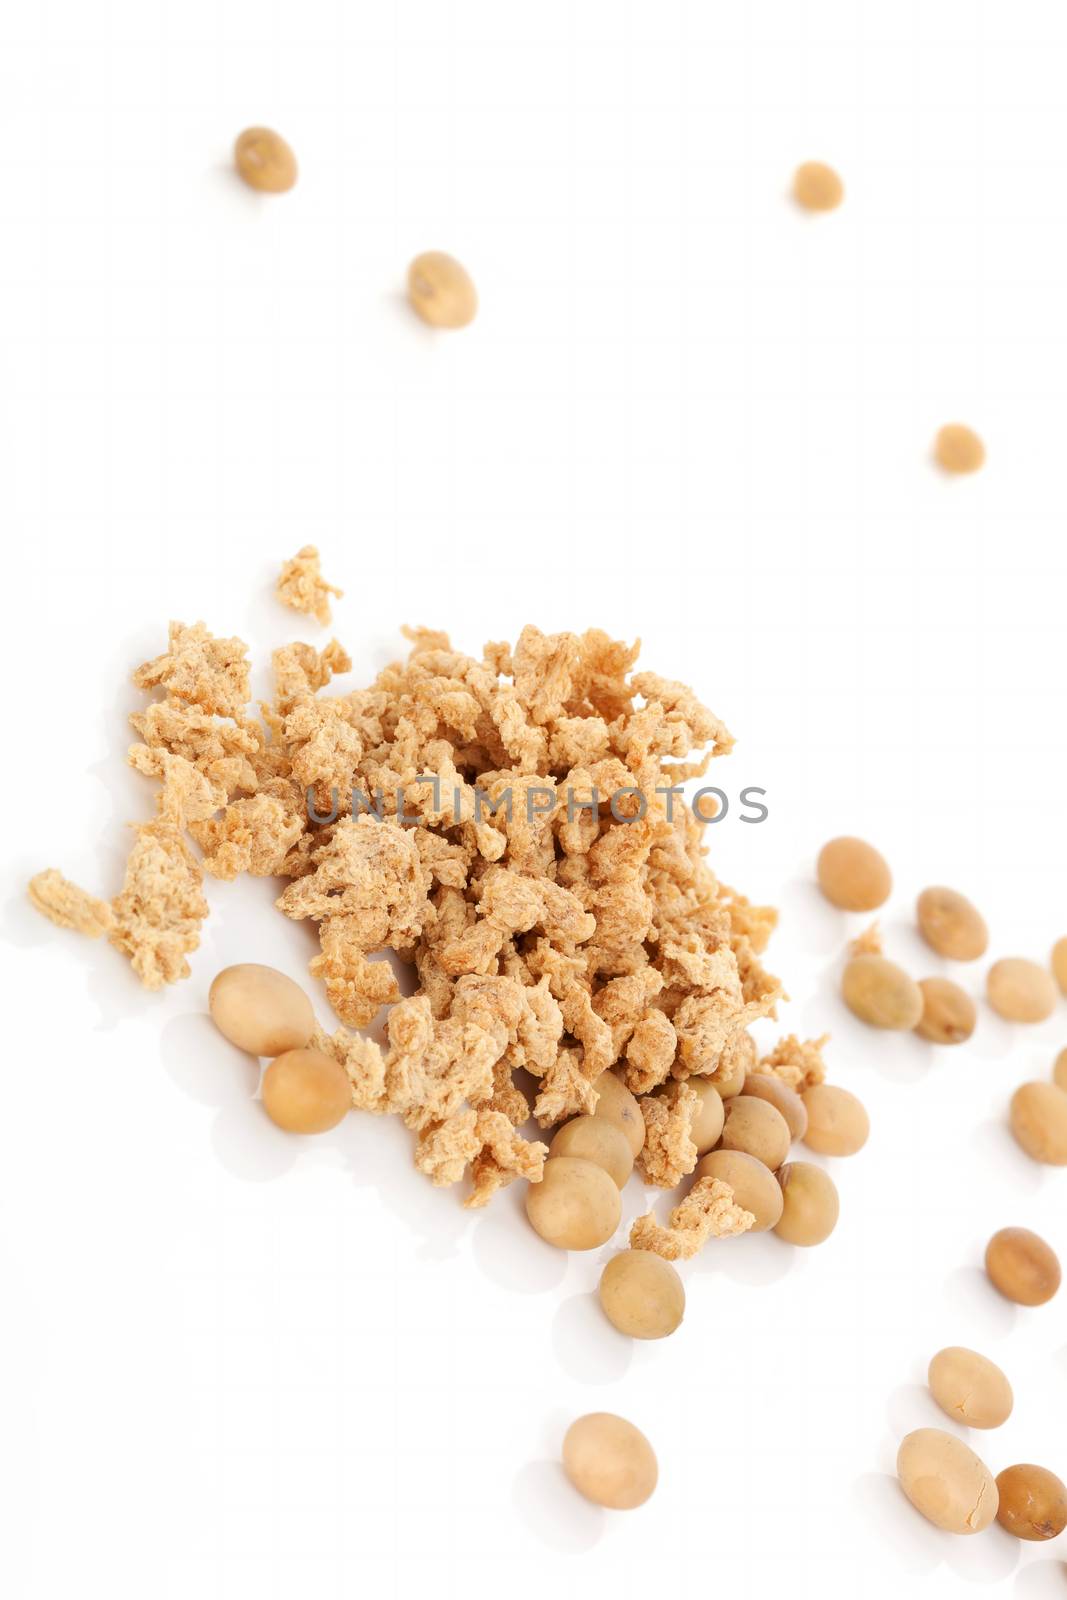 Soybeans and granules isolated on white background. Vegetarian and vegan eating concept.